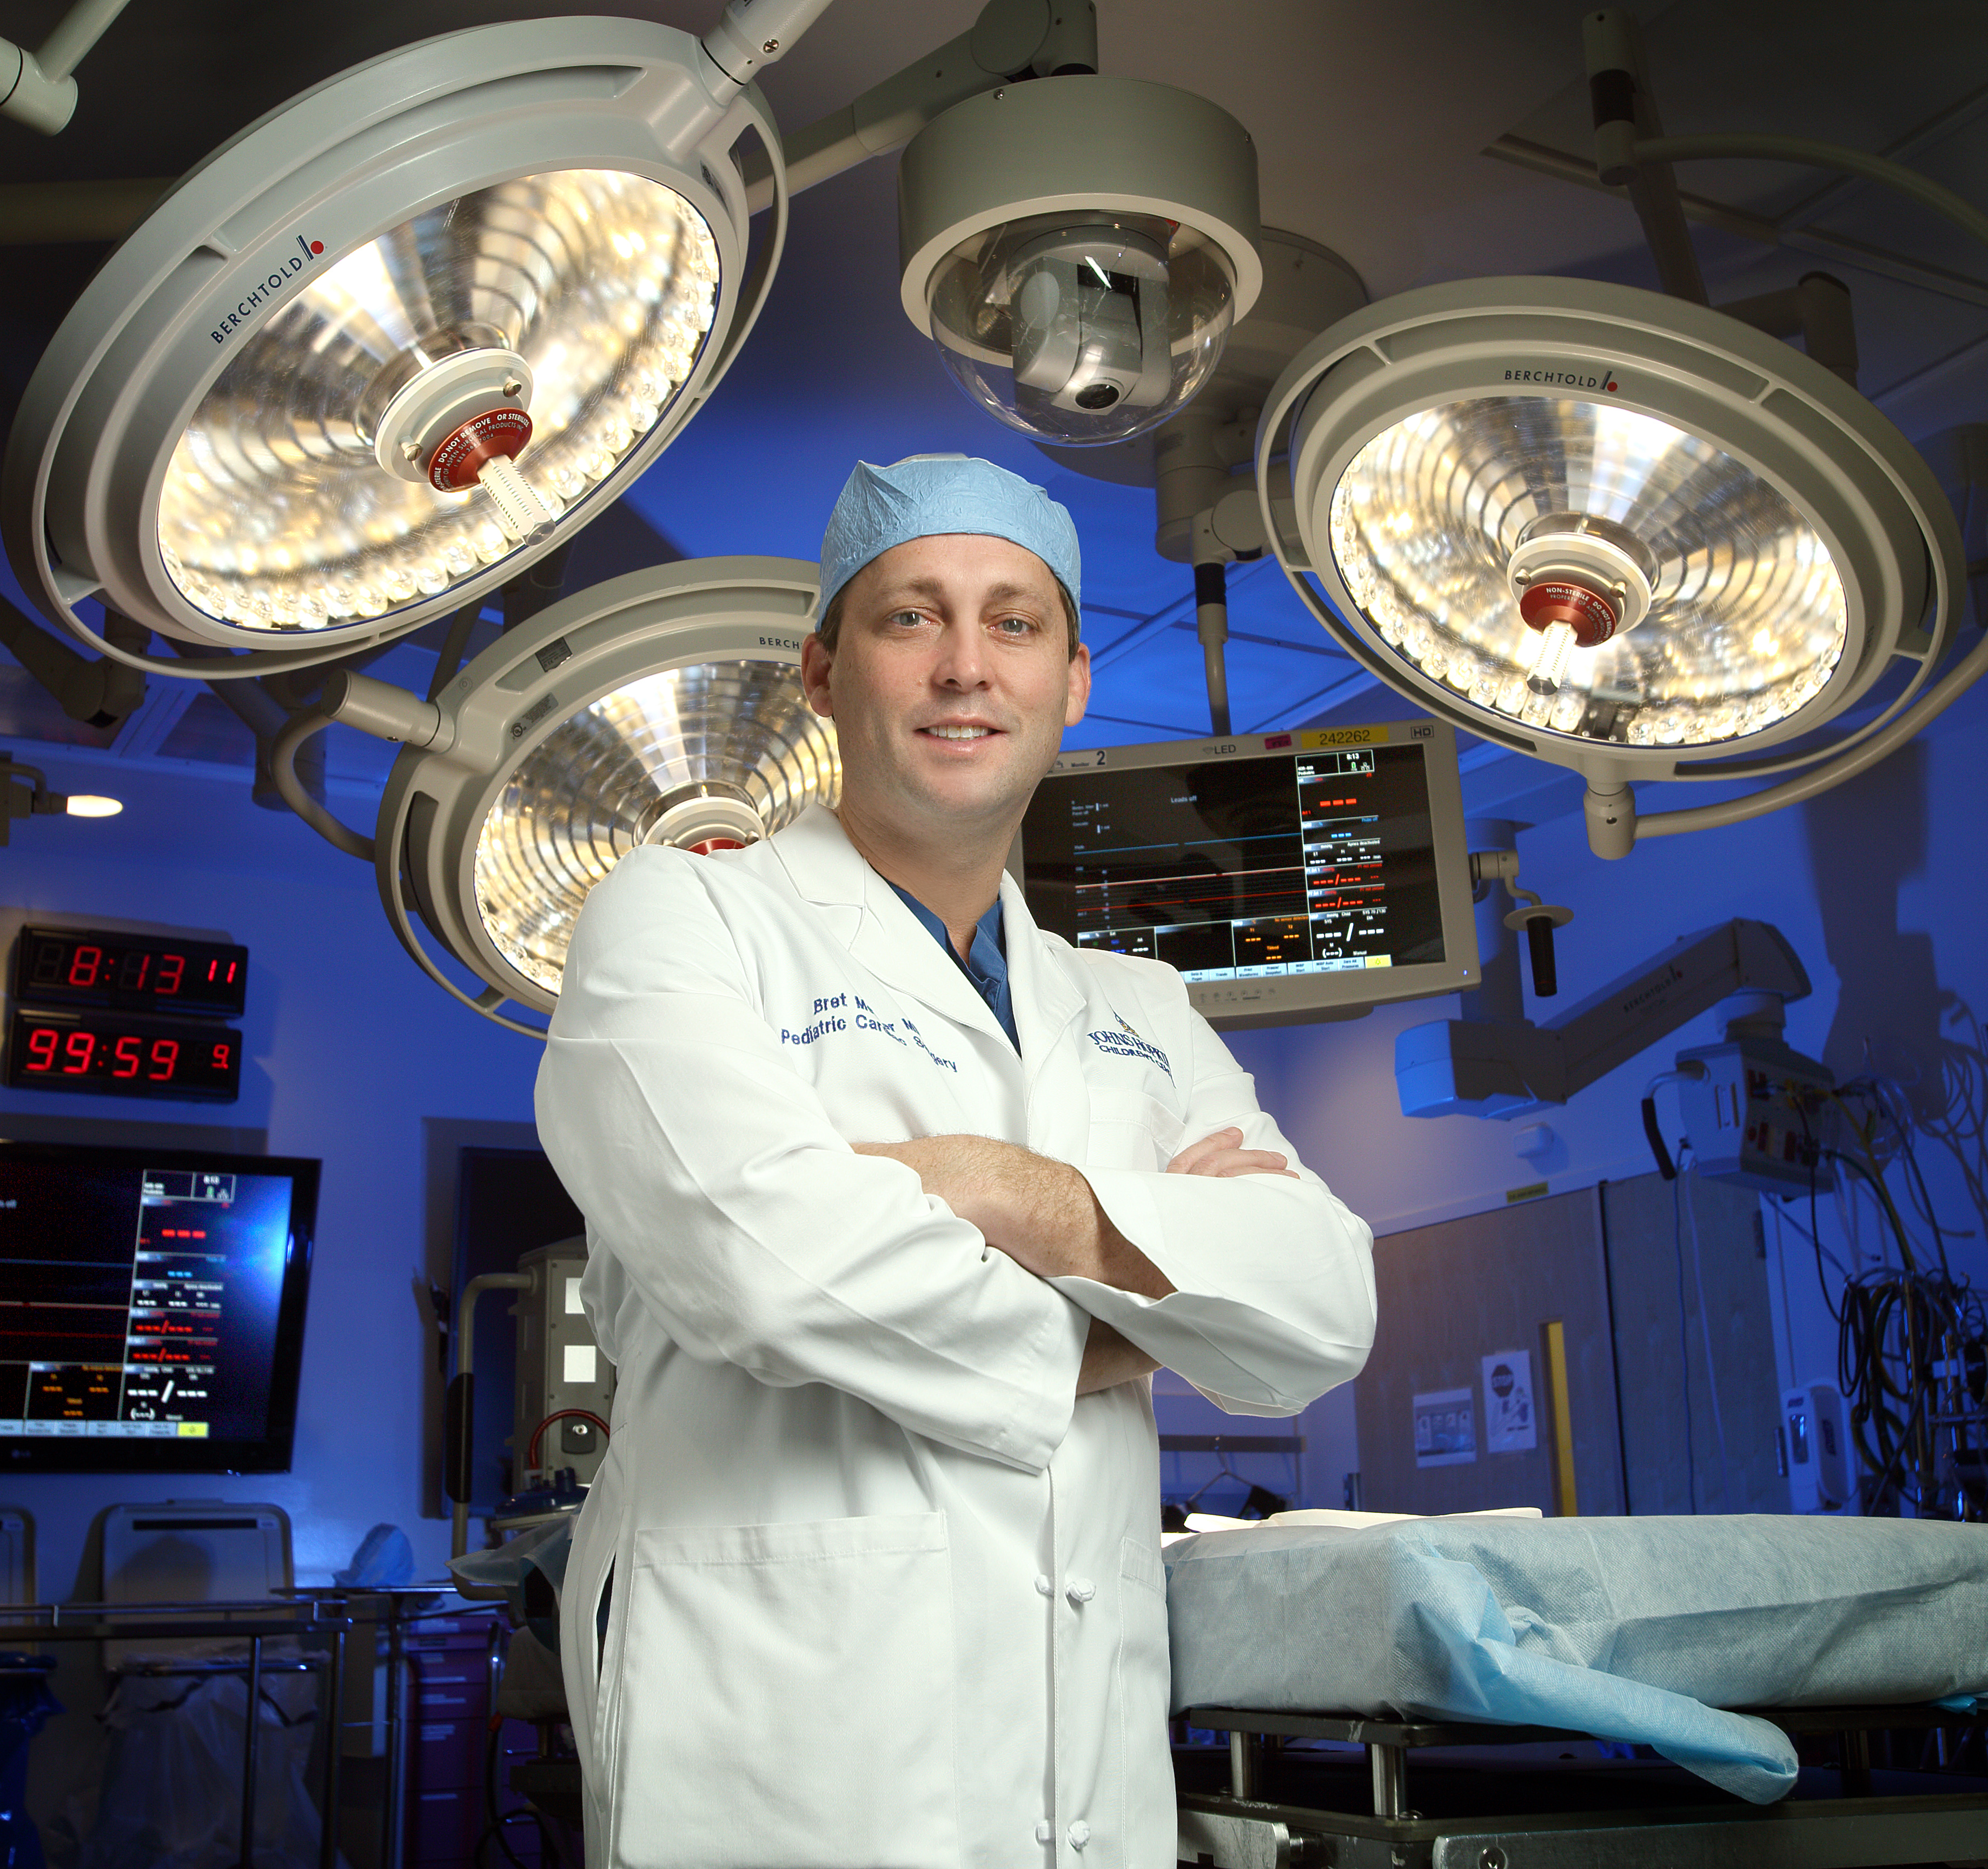 Bret Mettler is in operating room with arms crossed, standing in front of lighting and medical equipment. 